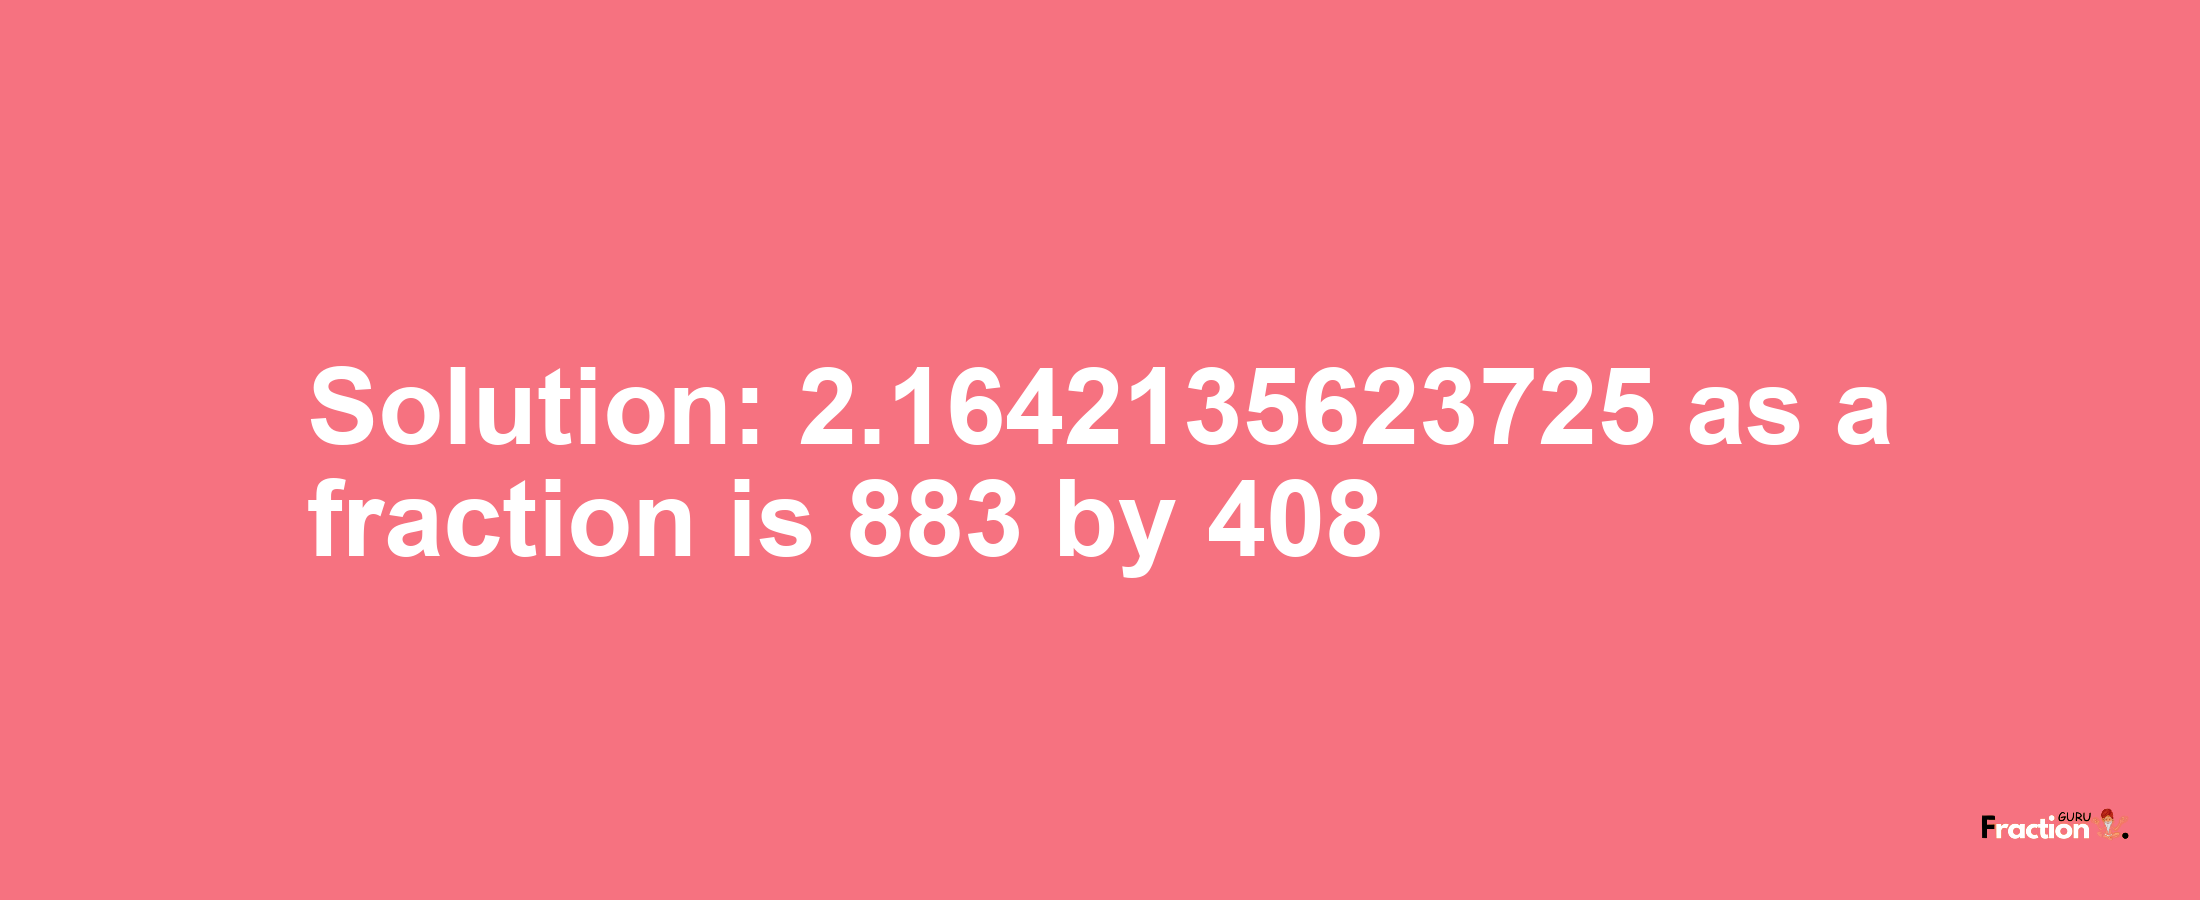 Solution:2.1642135623725 as a fraction is 883/408